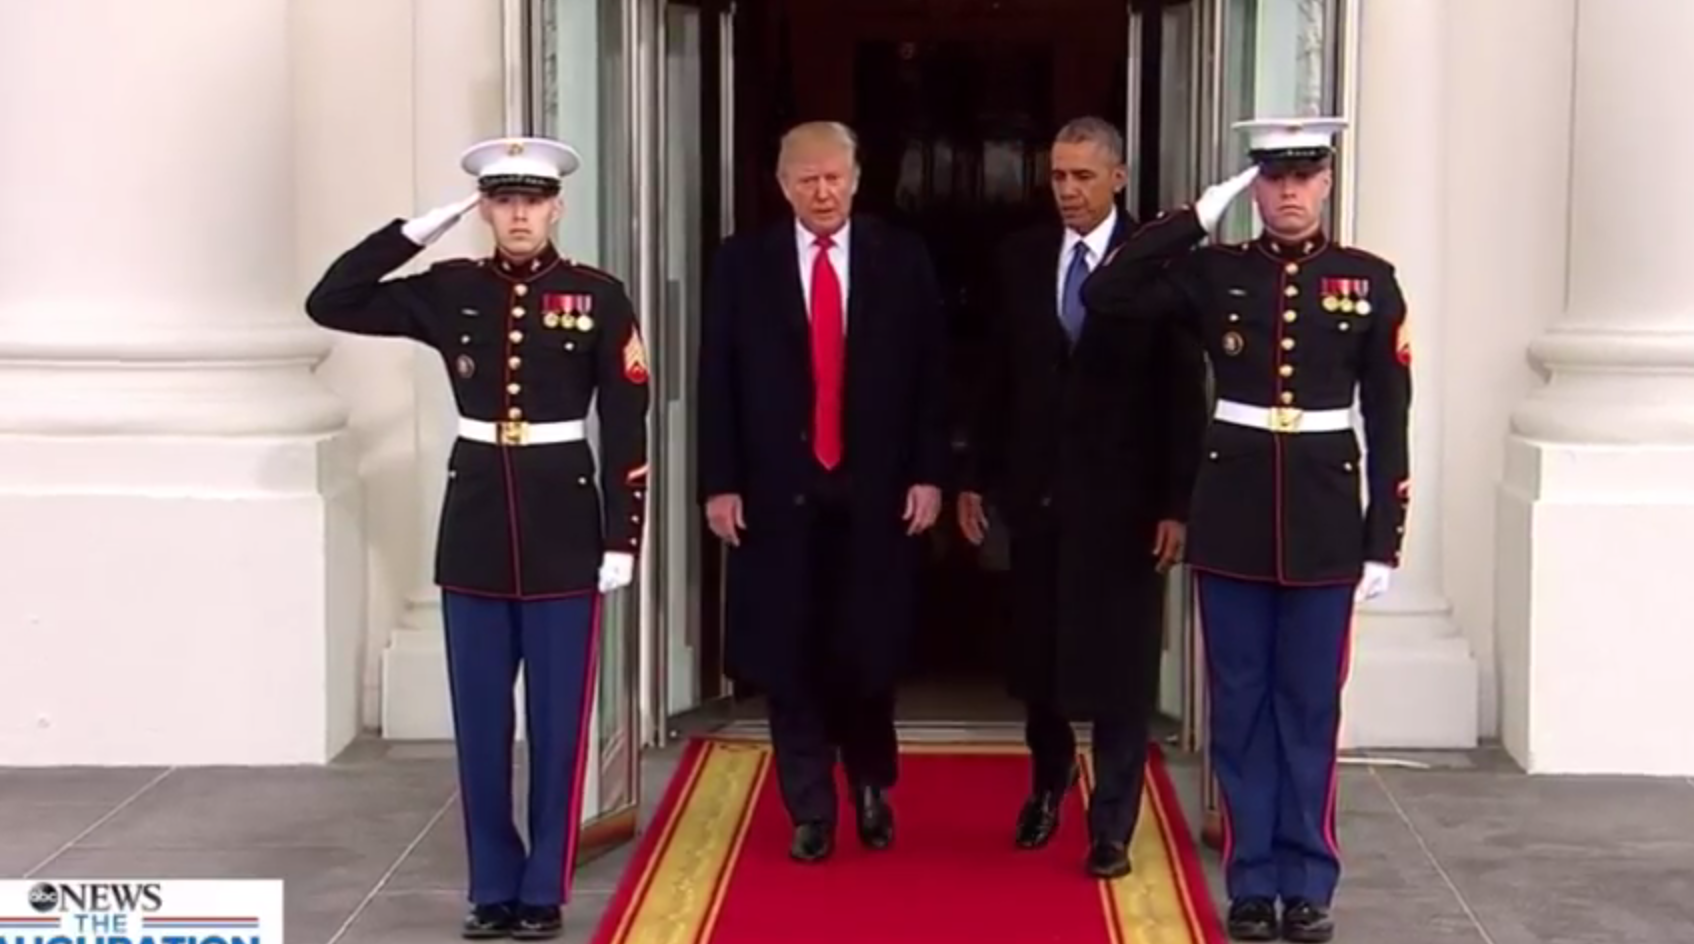 WATCH: RECAP: The Inauguration of Donald Trump: The 45th President of the United States